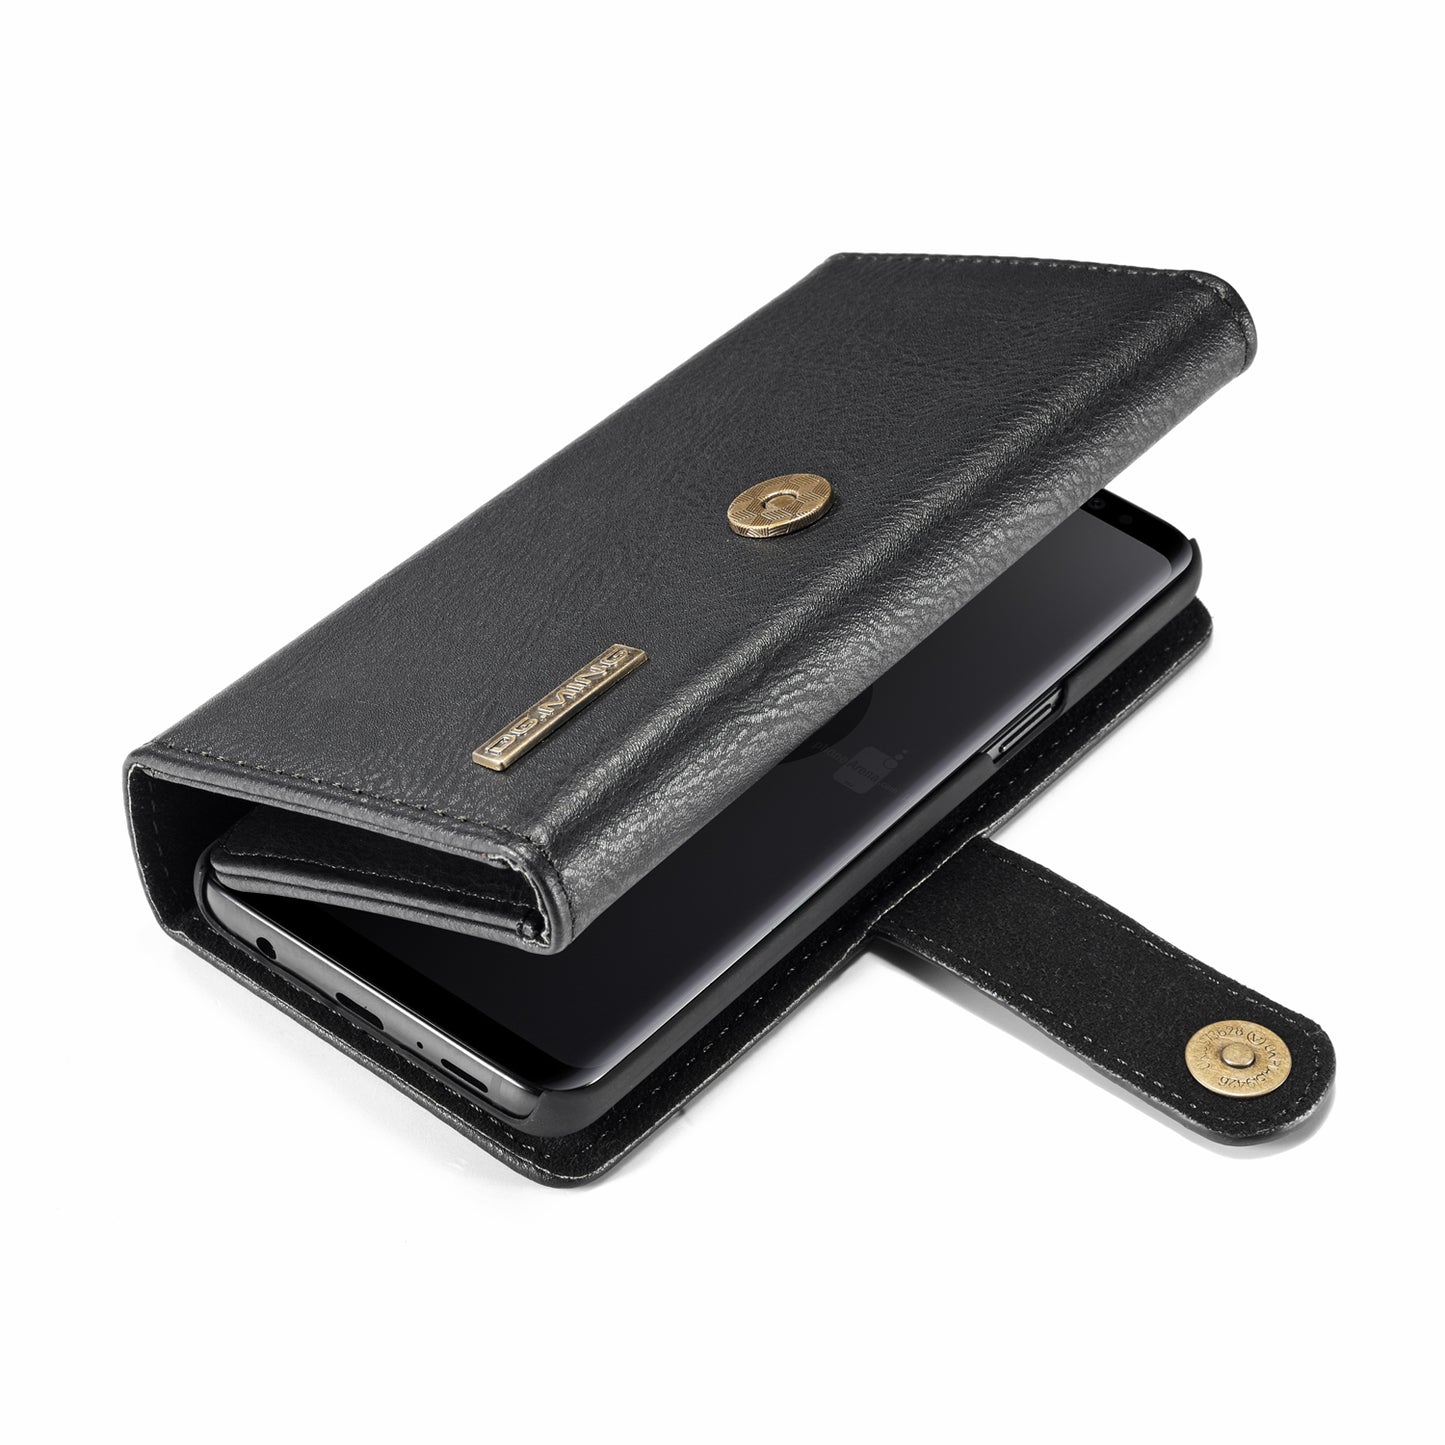 Multifunctional Wallet Card holder Leather Case for S8/S8 Plus/S9/S9 Plus - imhave